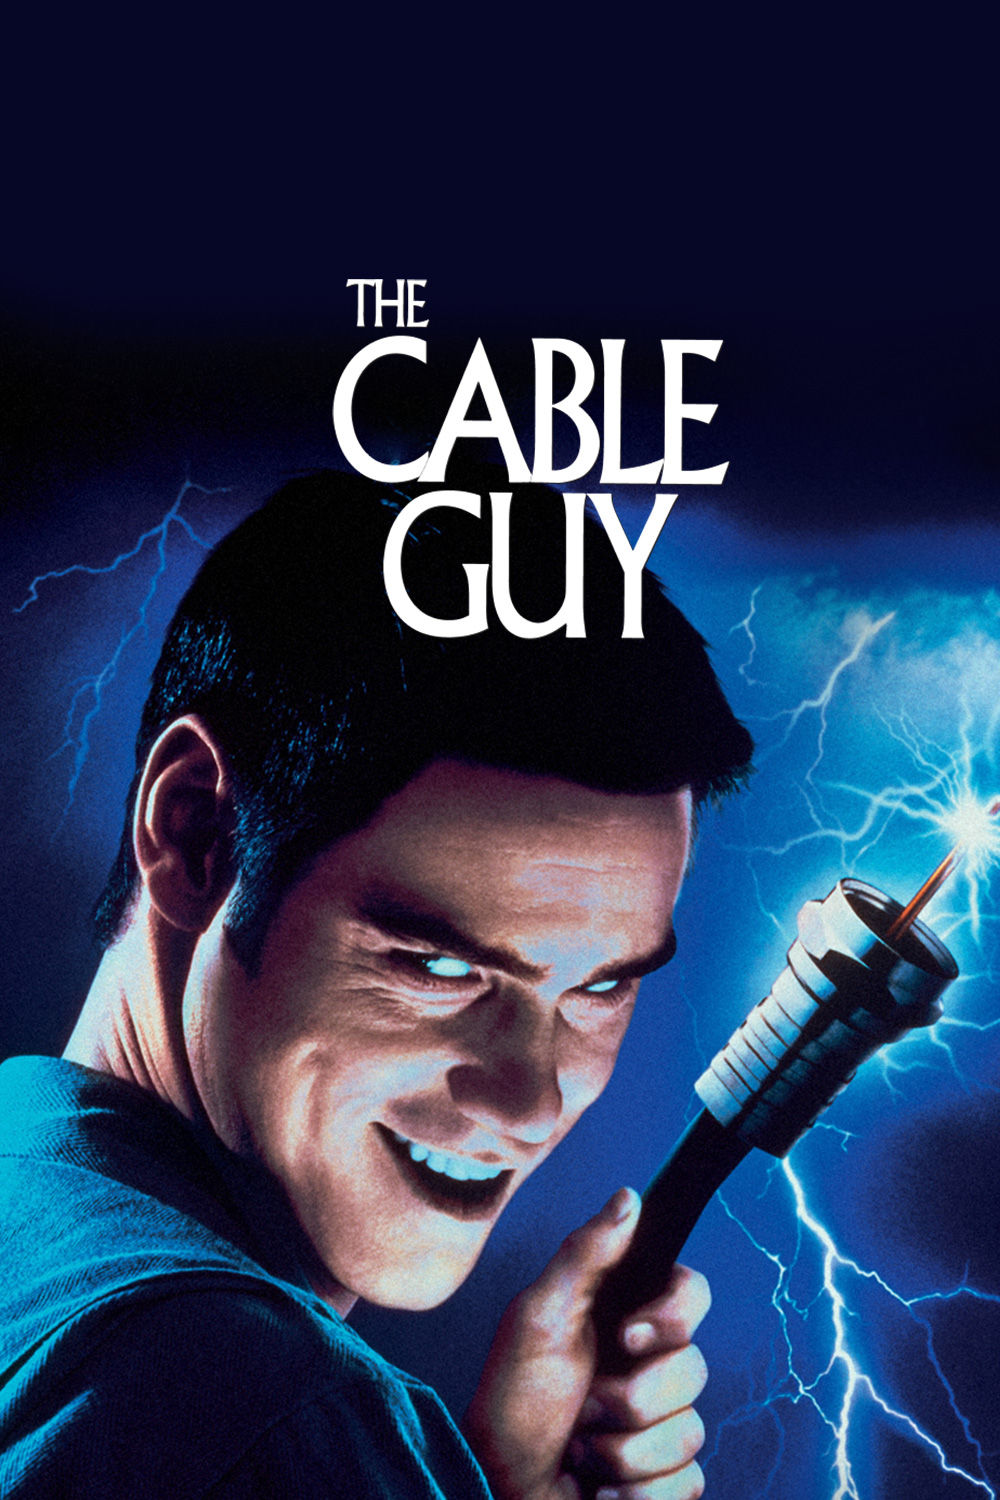 Watch The Cable Guy Online